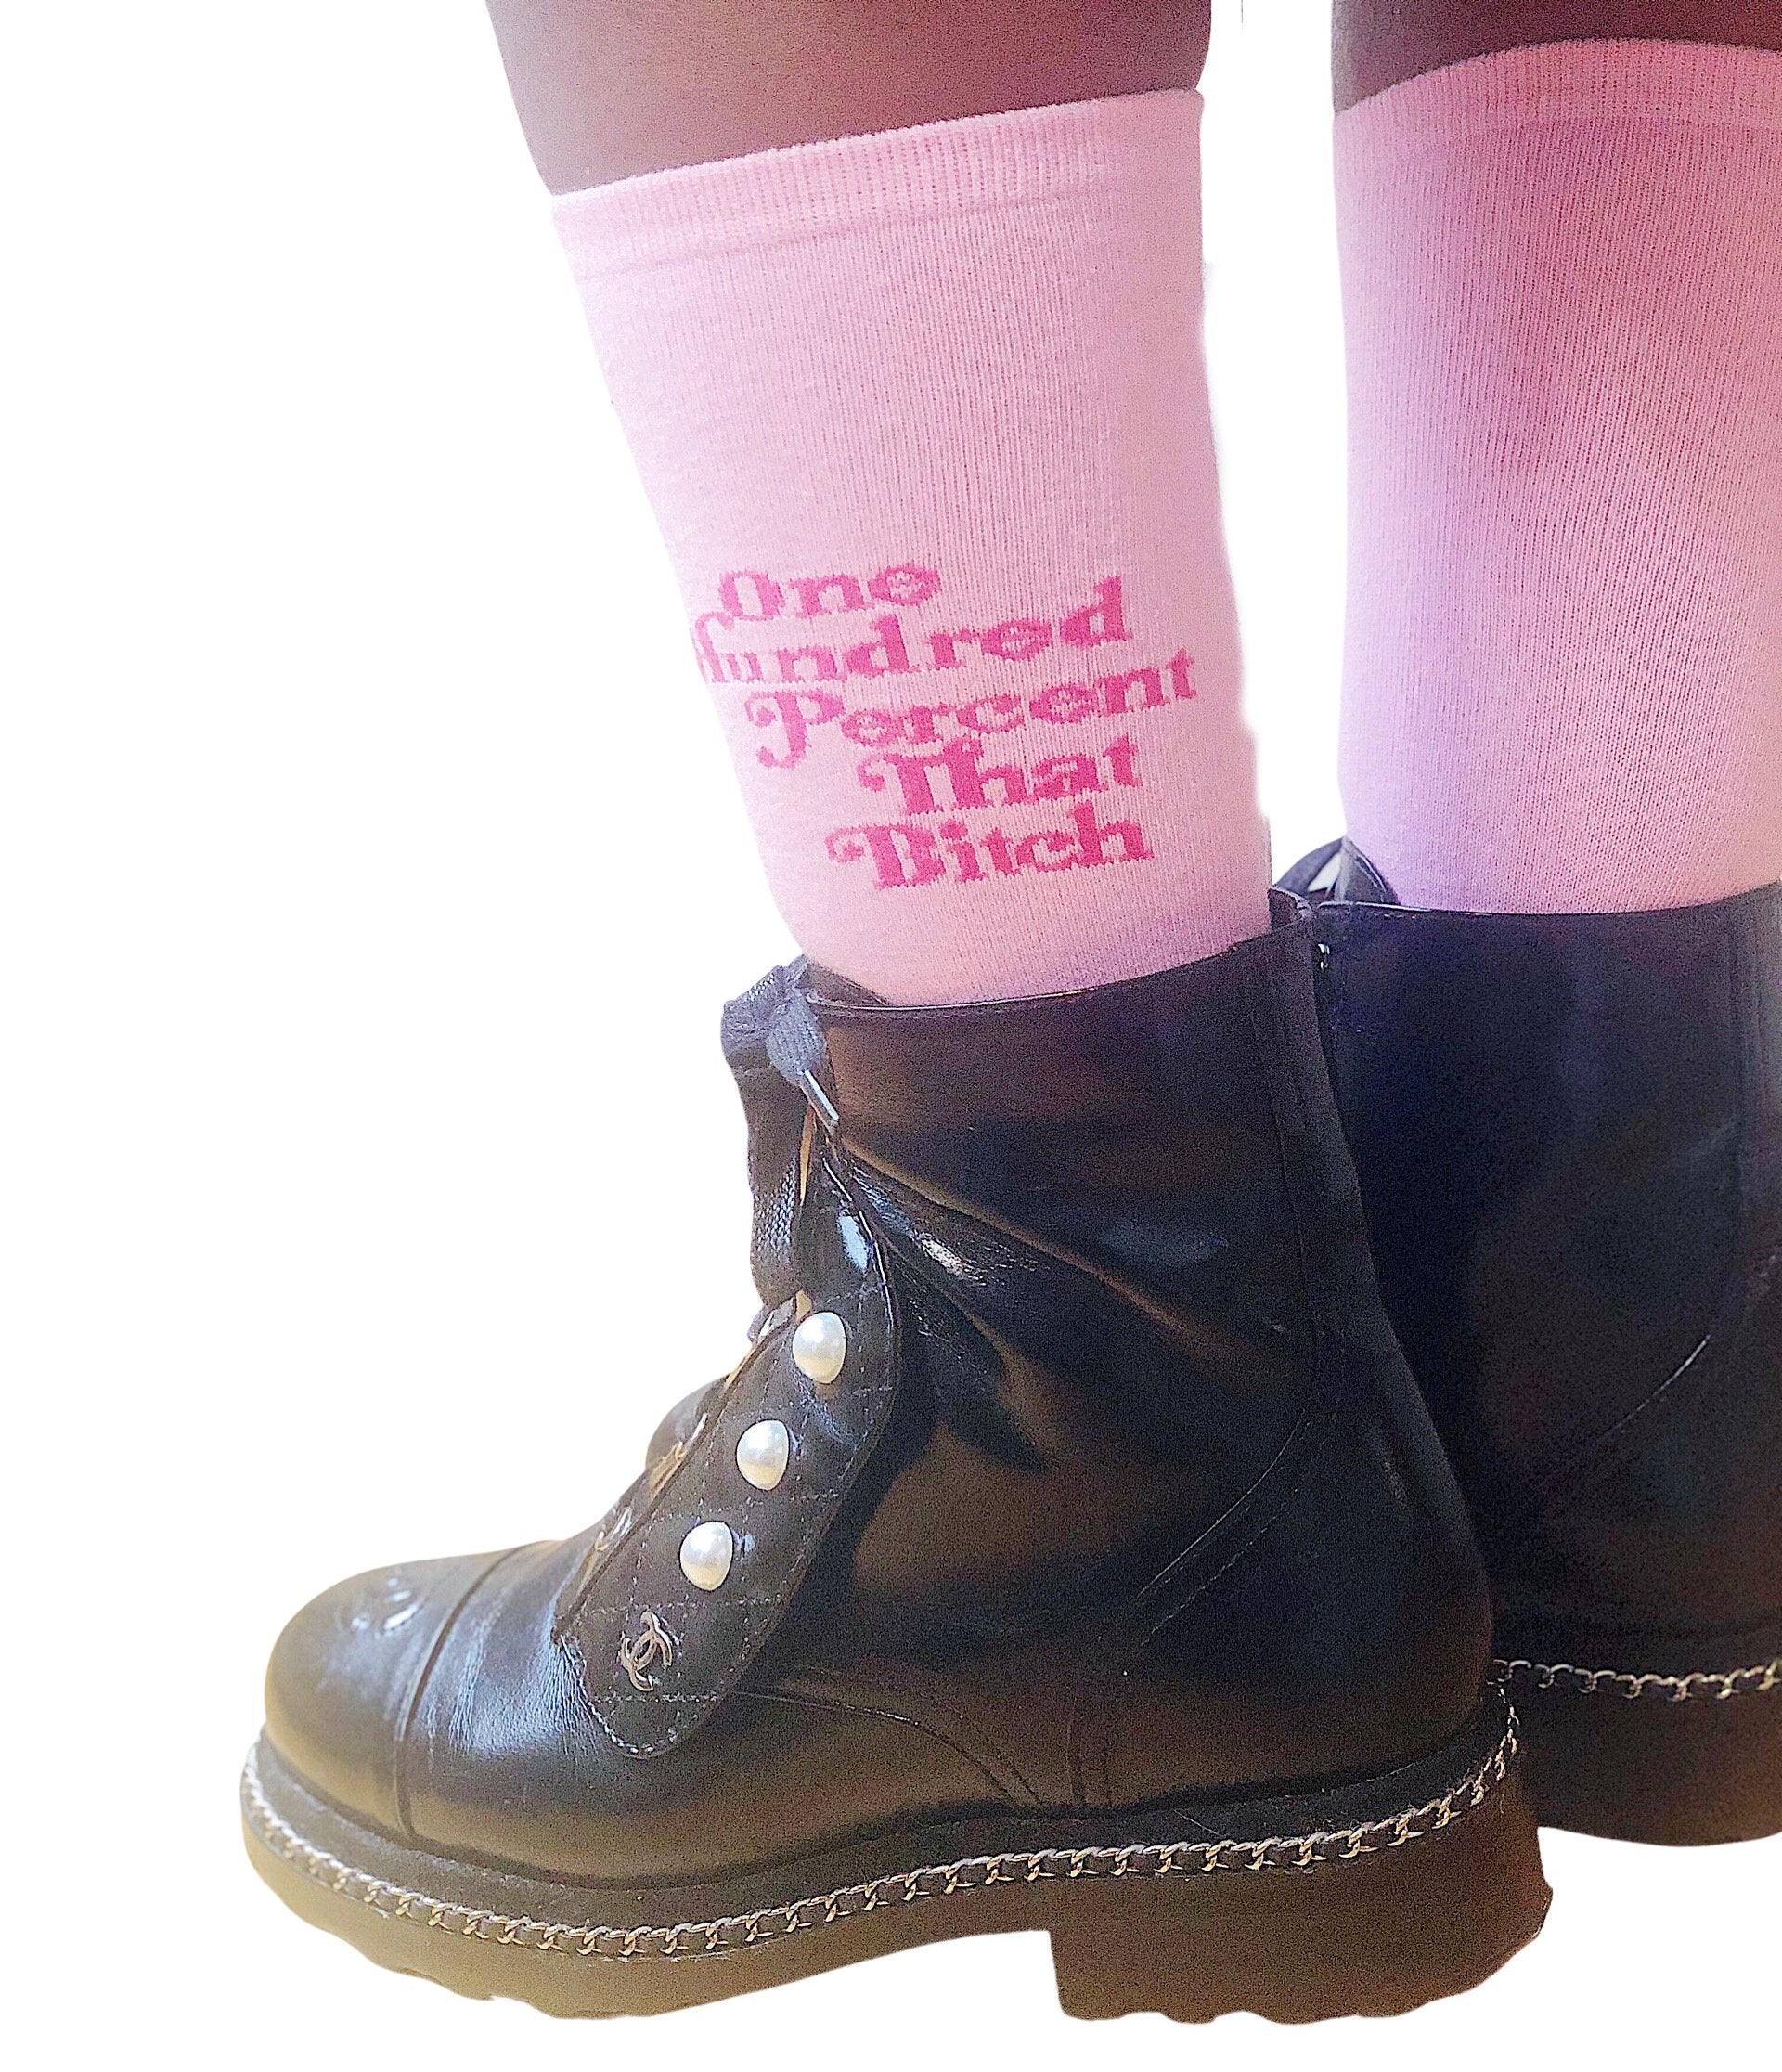 A Black woman wearing boots and pink socks